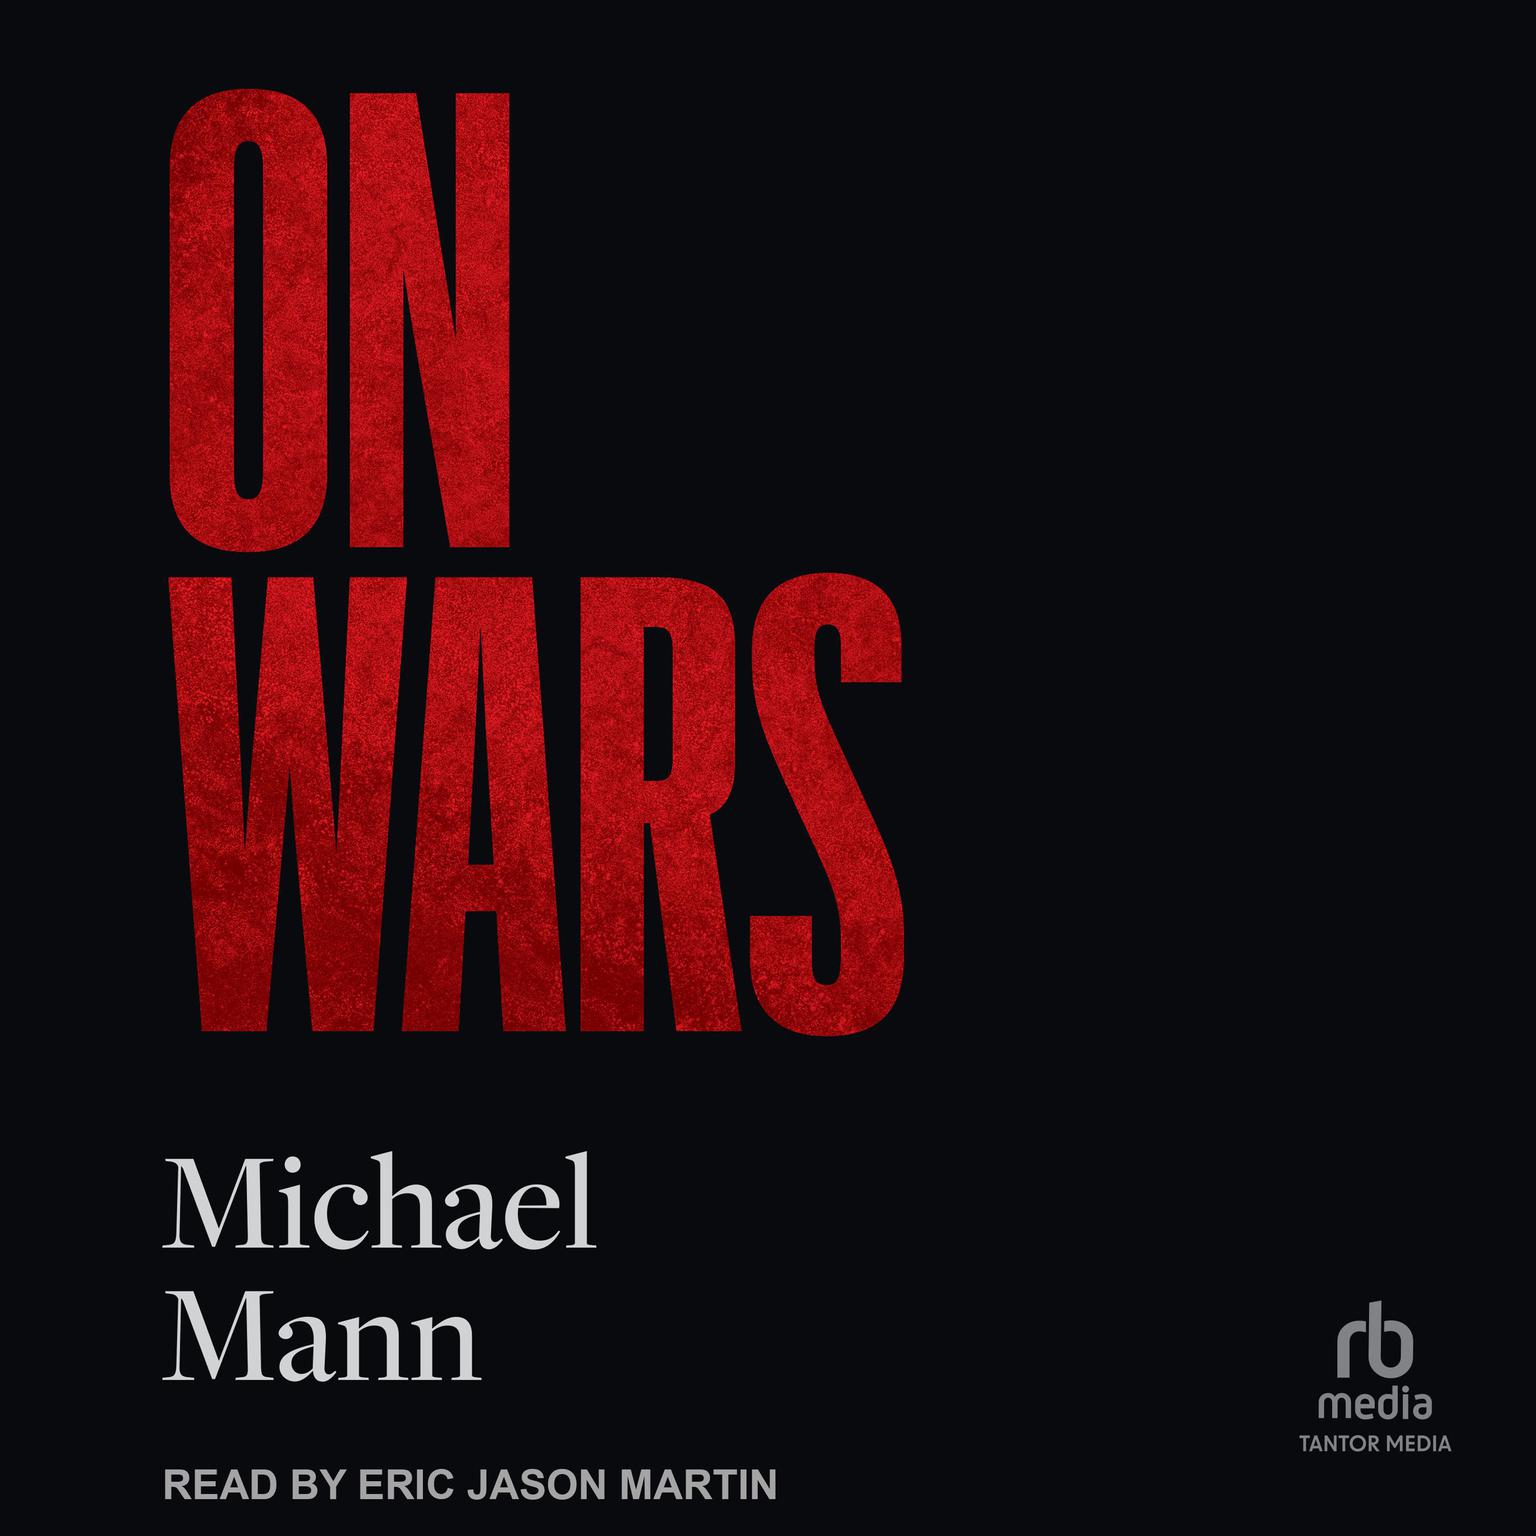 On Wars Audiobook, by Michael Mann